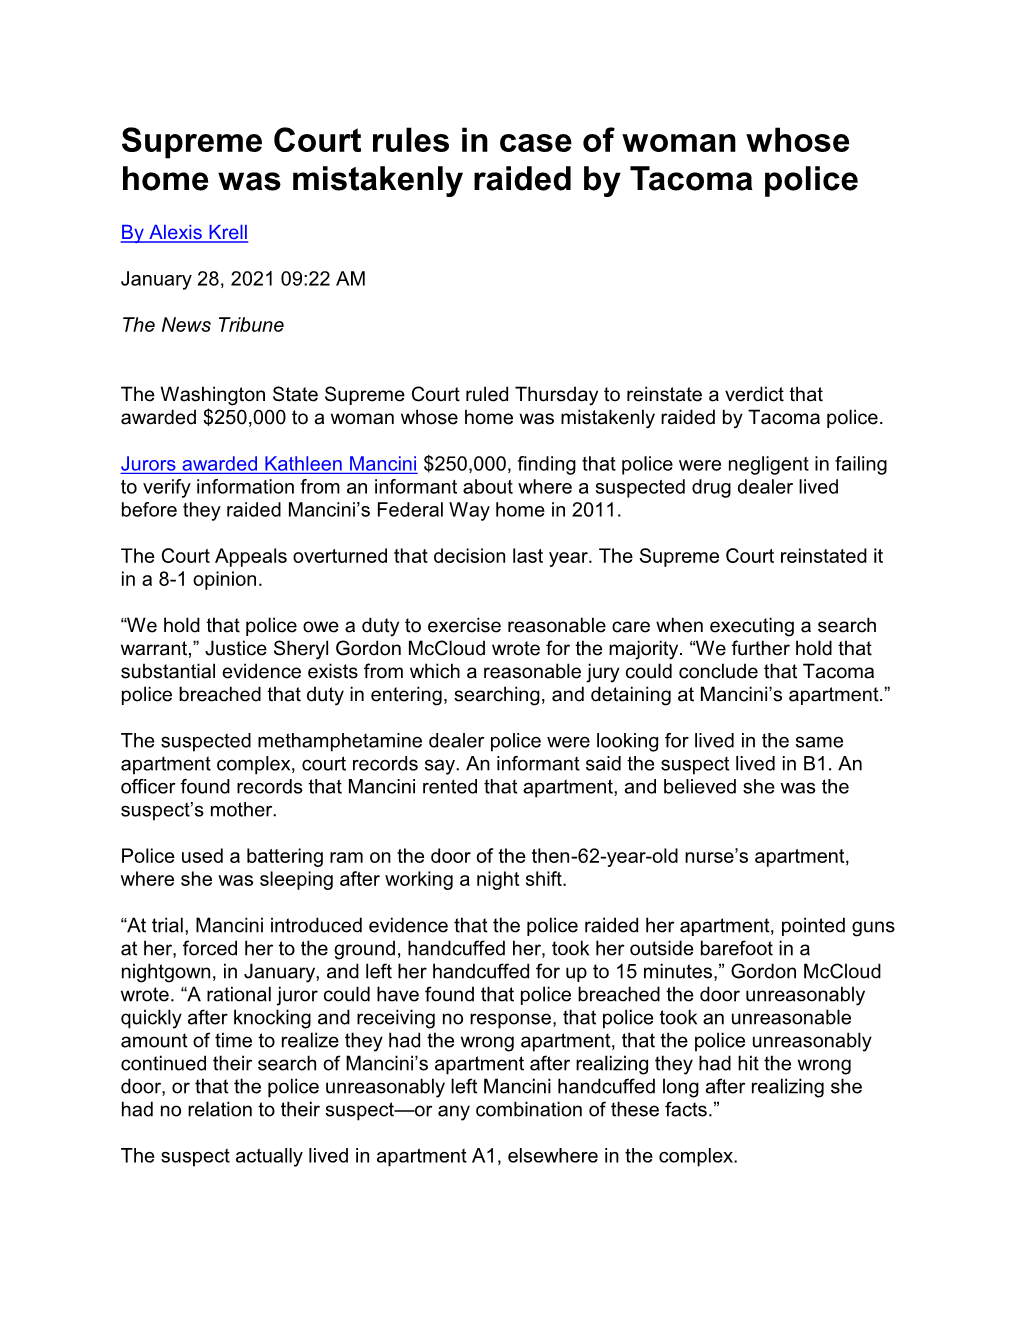 Supreme Court Rules in Case of Woman Whose Home Was Mistakenly Raided by Tacoma Police